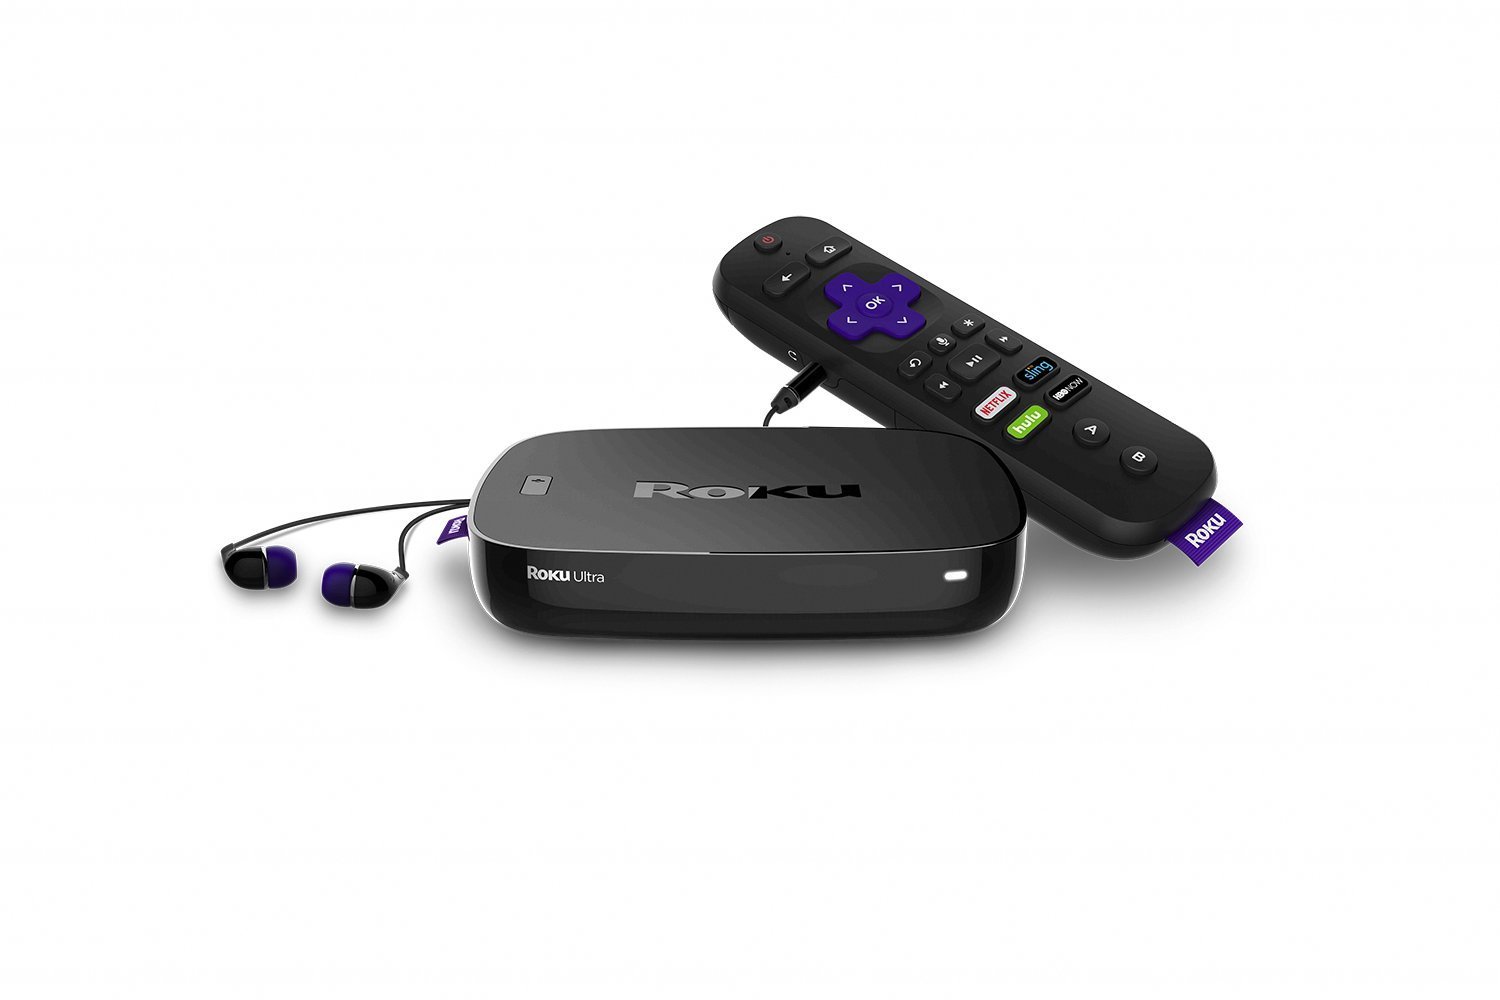 Today only: Refurbished Roku devices from $30